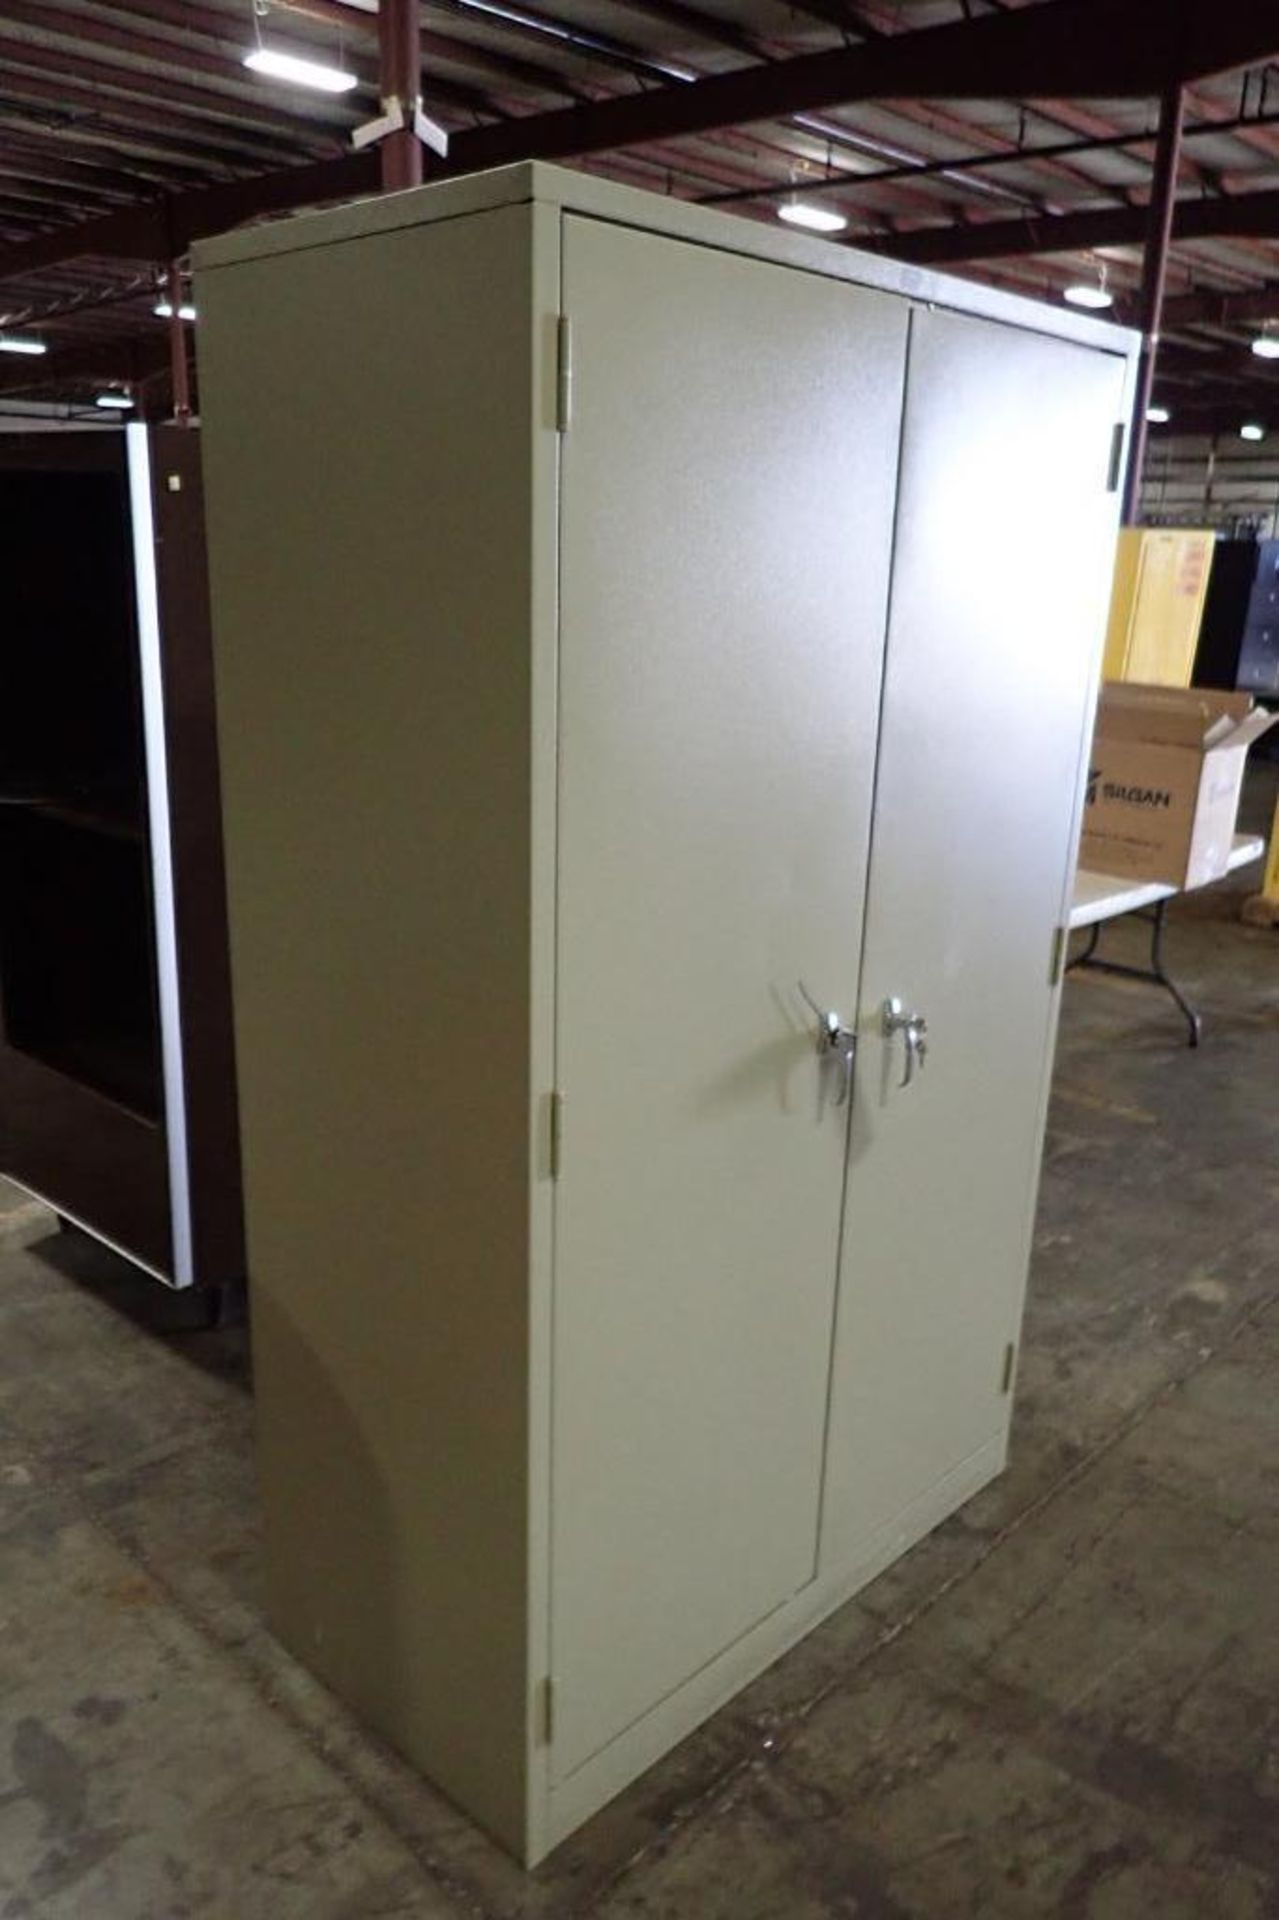 Global Industrial mild steel cabinet and contents {Located in Plymouth, IN} - Bild 2 aus 3